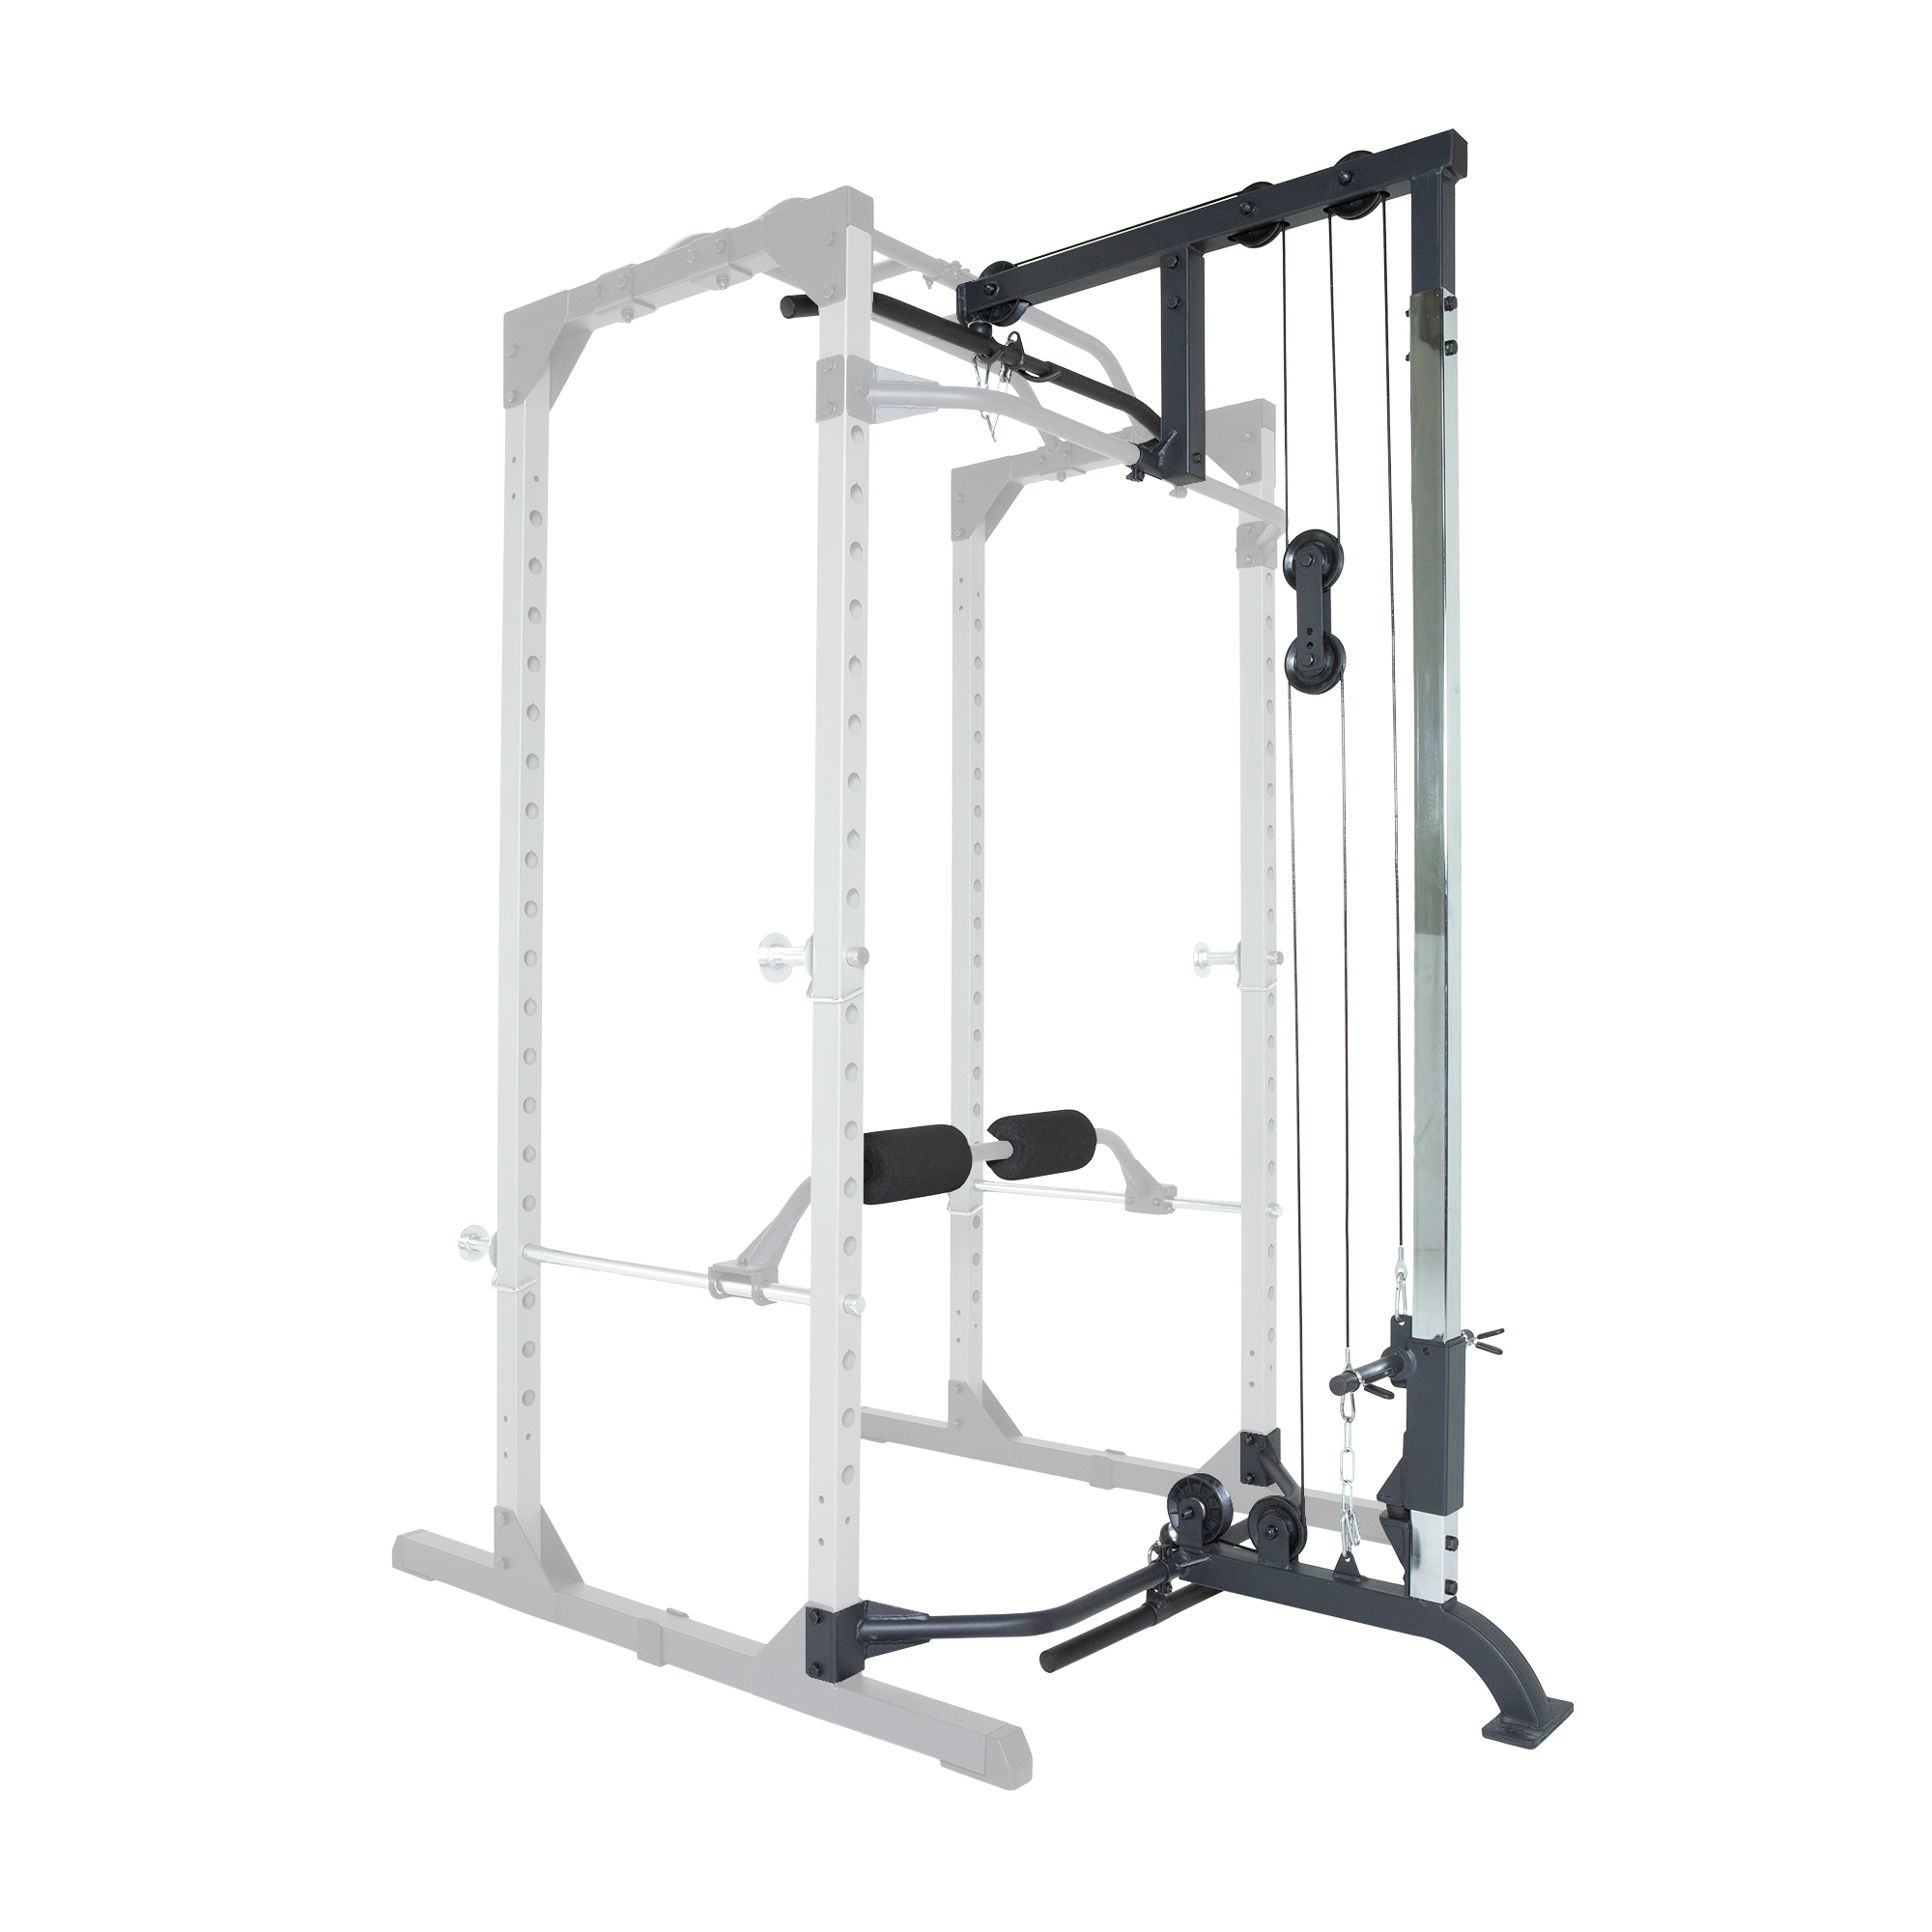 PROGEAR 310 Olympic Lat Pull Down and Low Row Cable Attachment for Progear 1600 Ultra Strength 800lb Weight Capacity Squat Stand Power Rack Cage with Lock-in J-Hooks - image 3 of 20